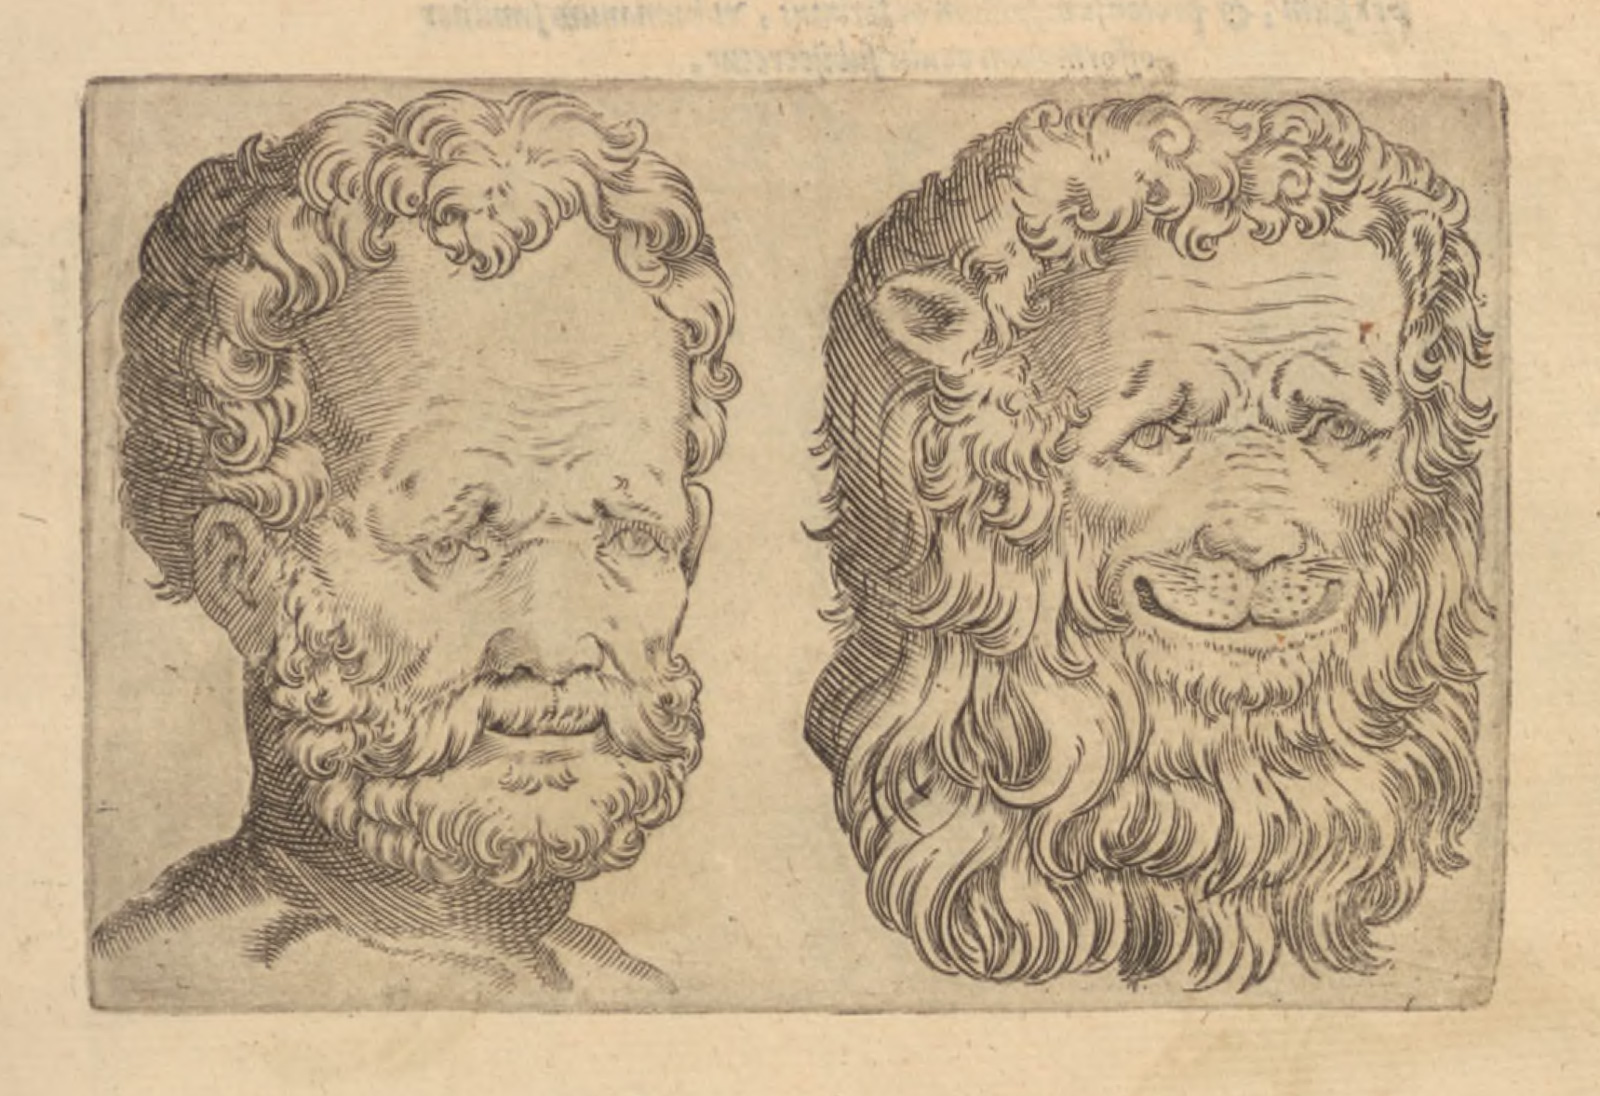 Illustration comparing the head of a man to the head of a lion